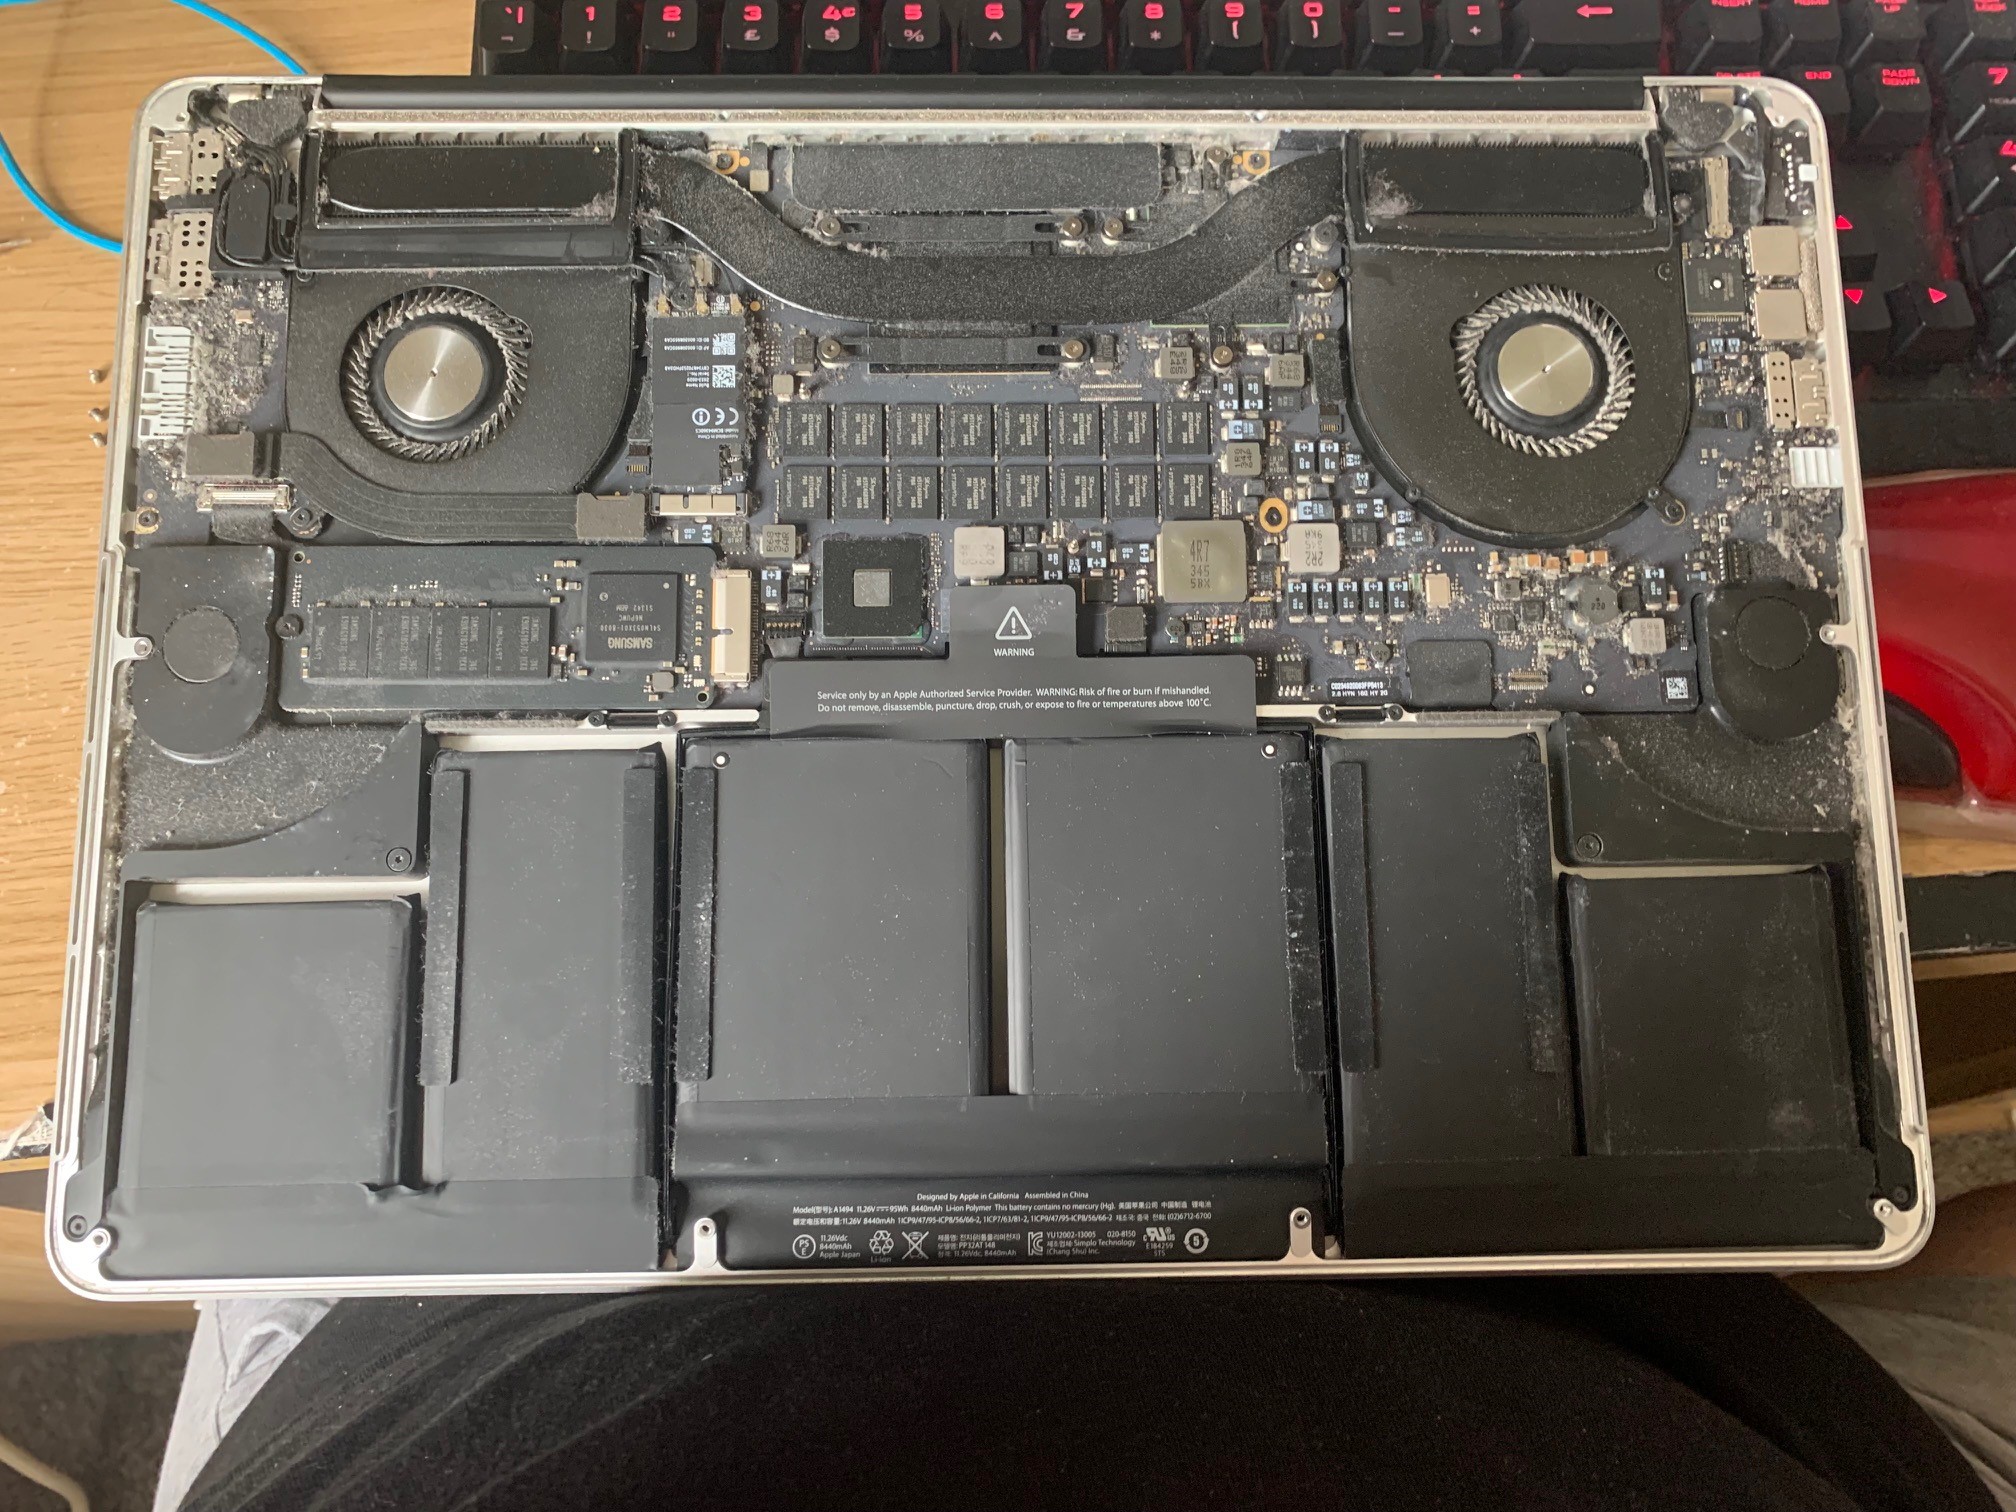 A dusty 8 year old MacBook Pro